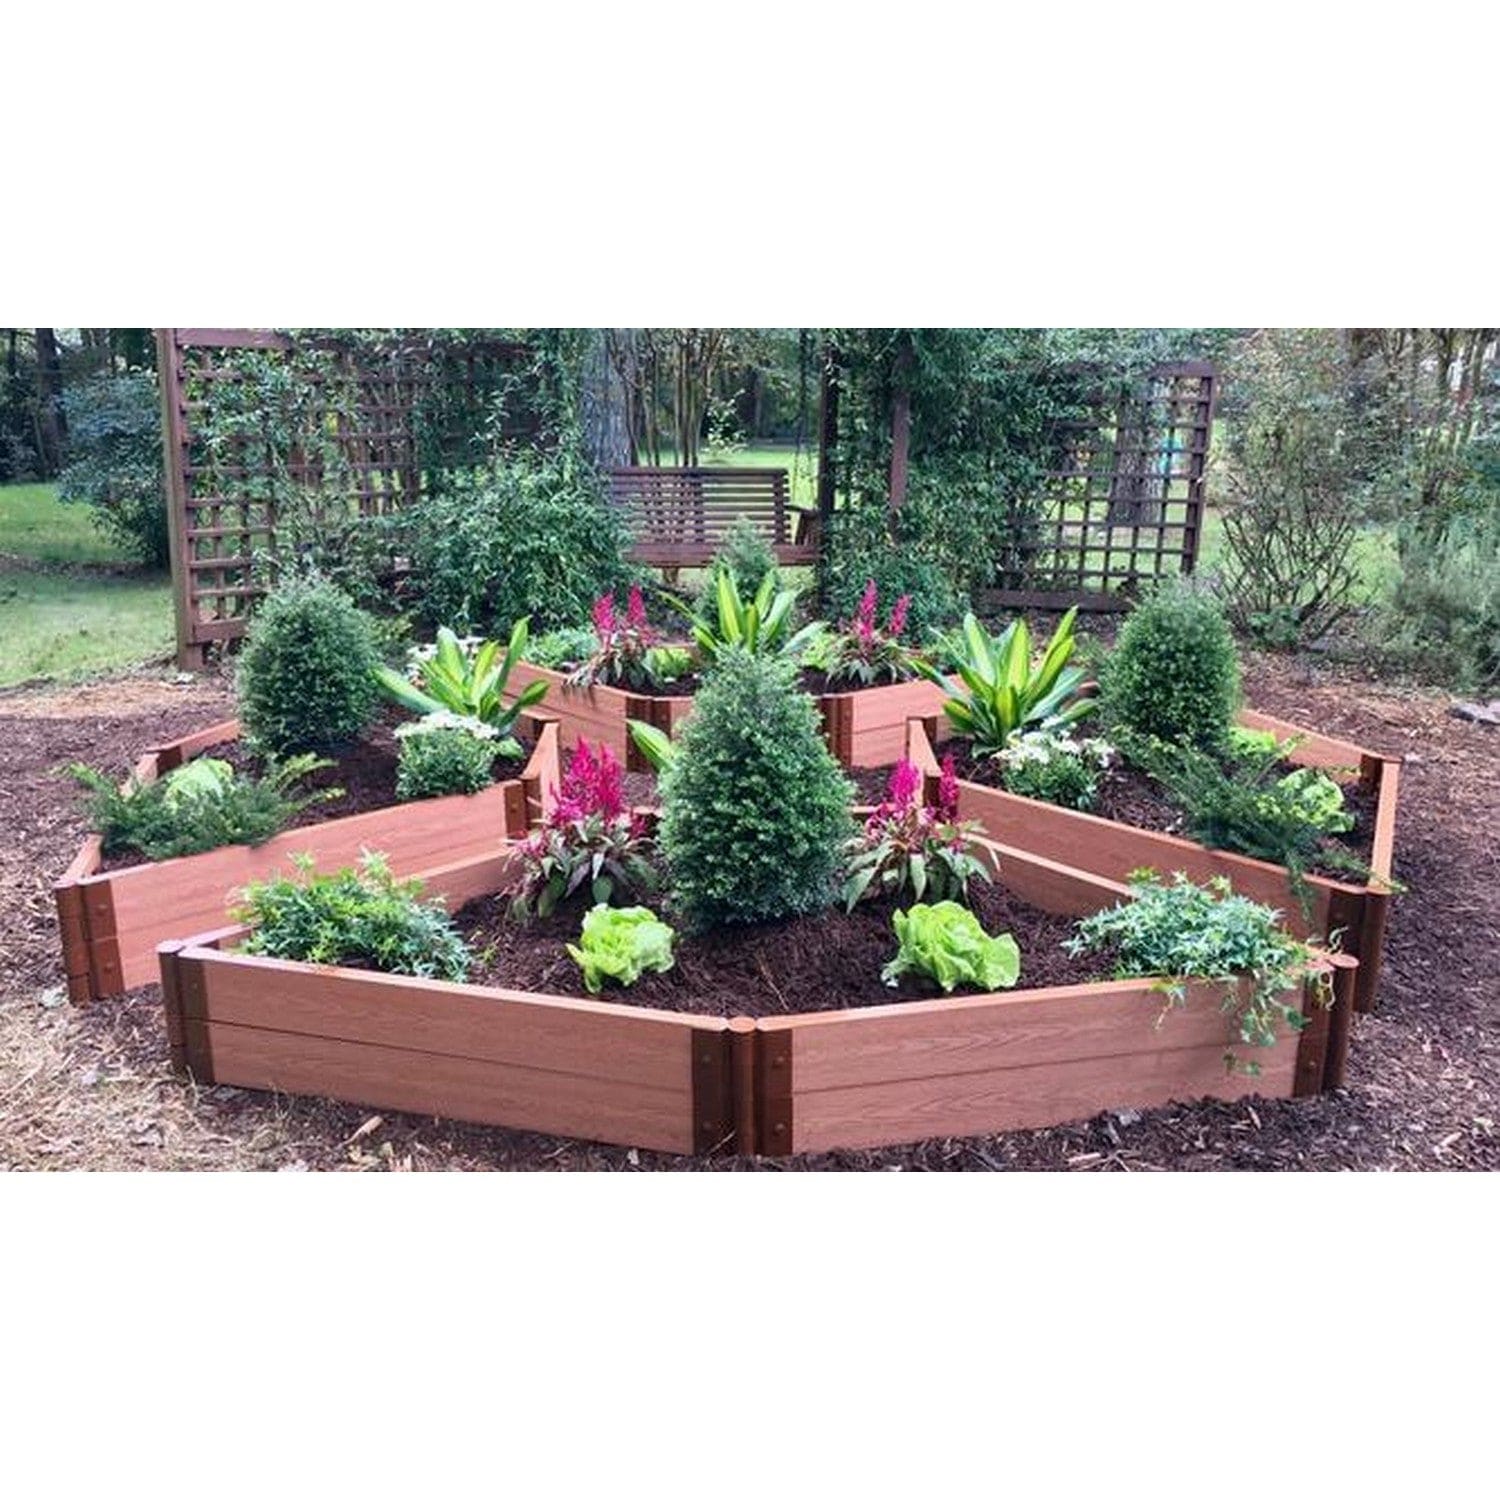 Frame It All Gardening Accessories Frame It All | Tool-Free Elizabethan Garden Raised Garden Bed (4-Sided Triangle) 12' X 12' X 16.5" - Uptown Brown - 1" Profile 200003478